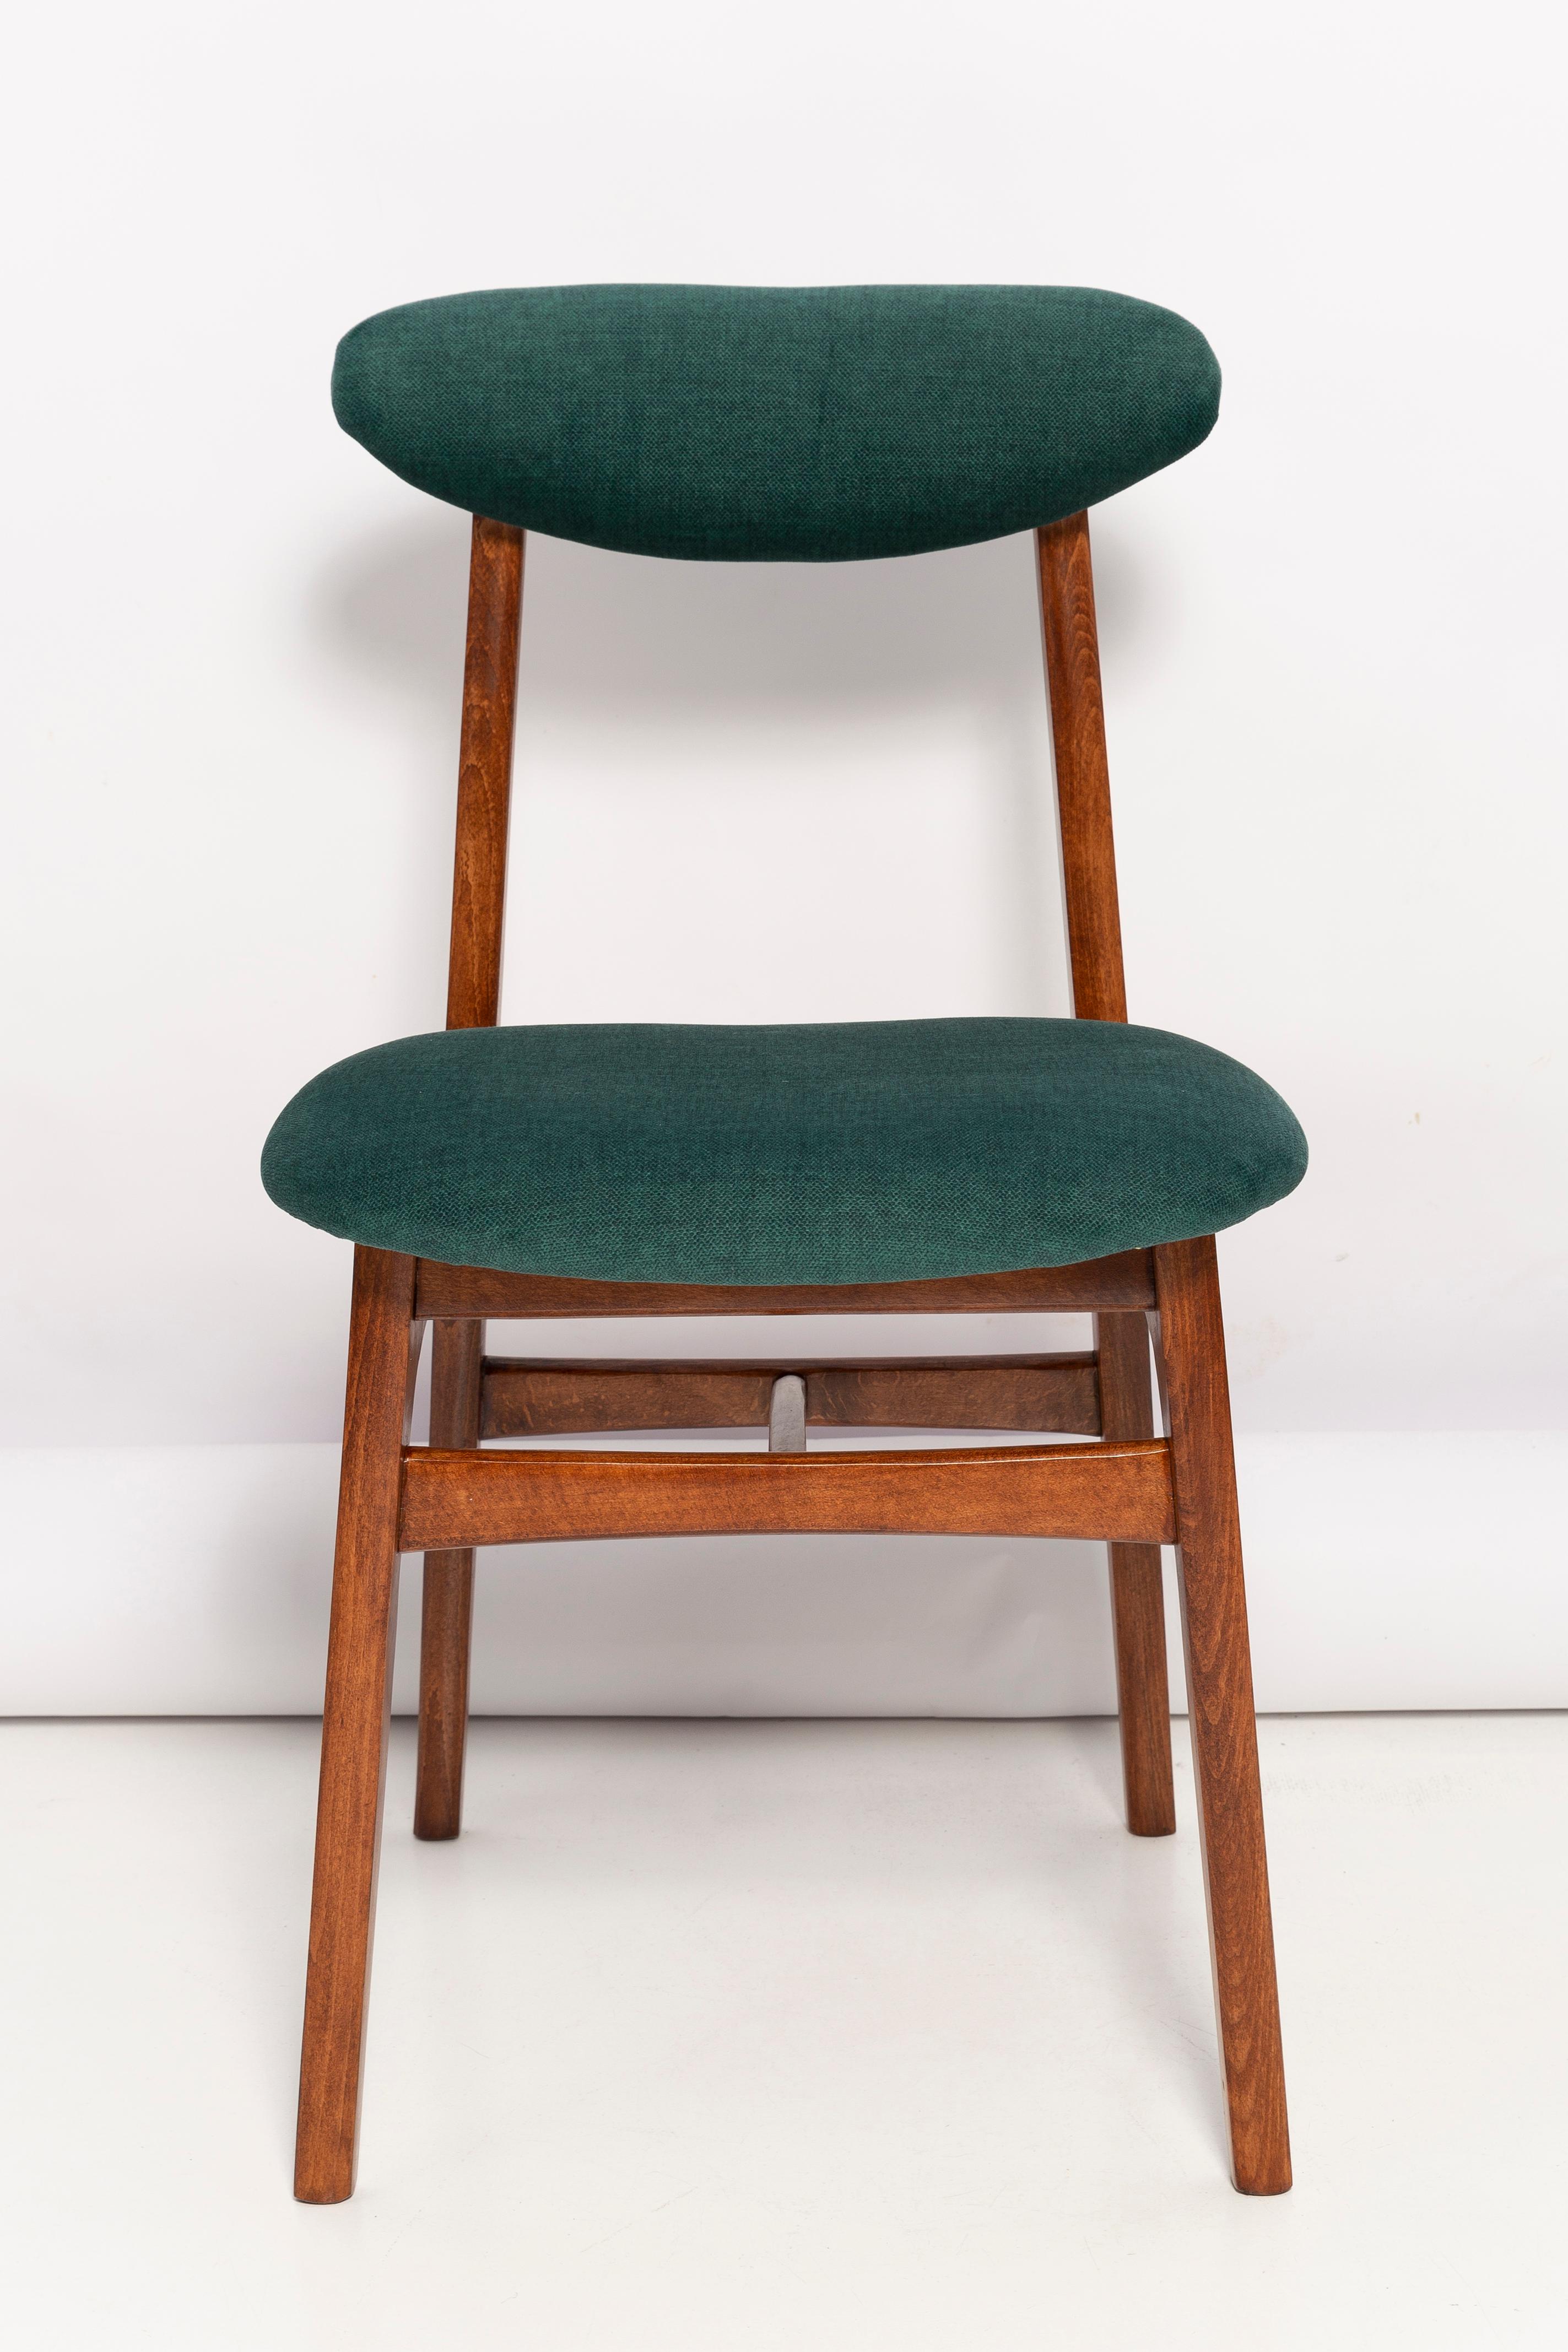 Chairs designed by prof. Rajmund Halas. They have been made of beechwood. They have undergone a complete upholstery renovation, the woodwork has been refreshed. Seats and backs were dressed in a dark green, durable and pleasant to the touch velvet